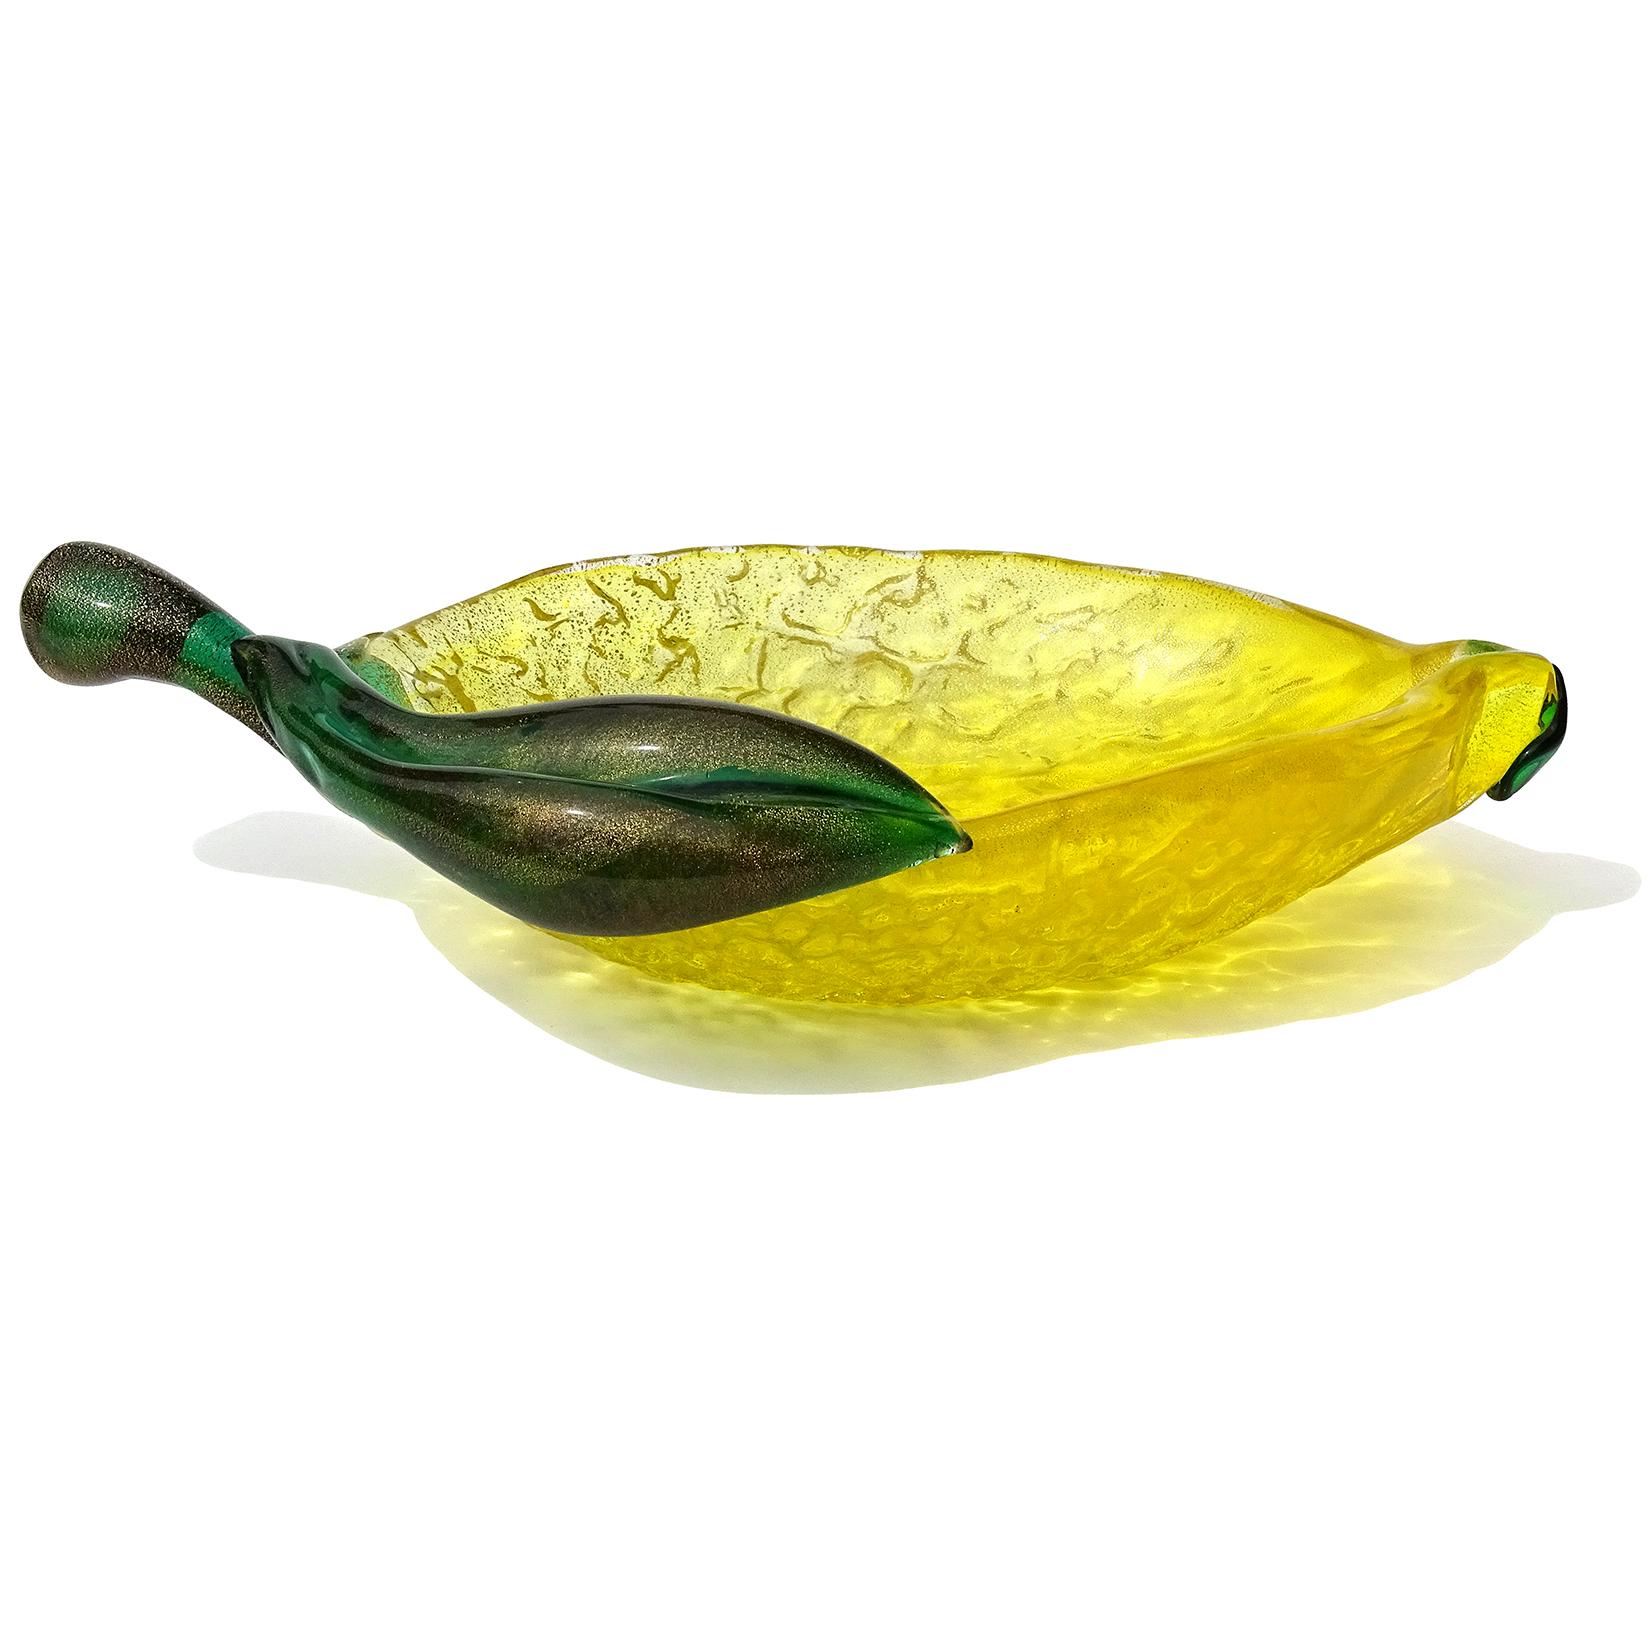 Beautiful large vintage Murano hand blown yellow, green and gold flecks Italian art glass lemon shaped fruit bowl. Documented to designer Archimede Seguso. The piece is made with a bright yellow color and textured surface. It is profusely covered in